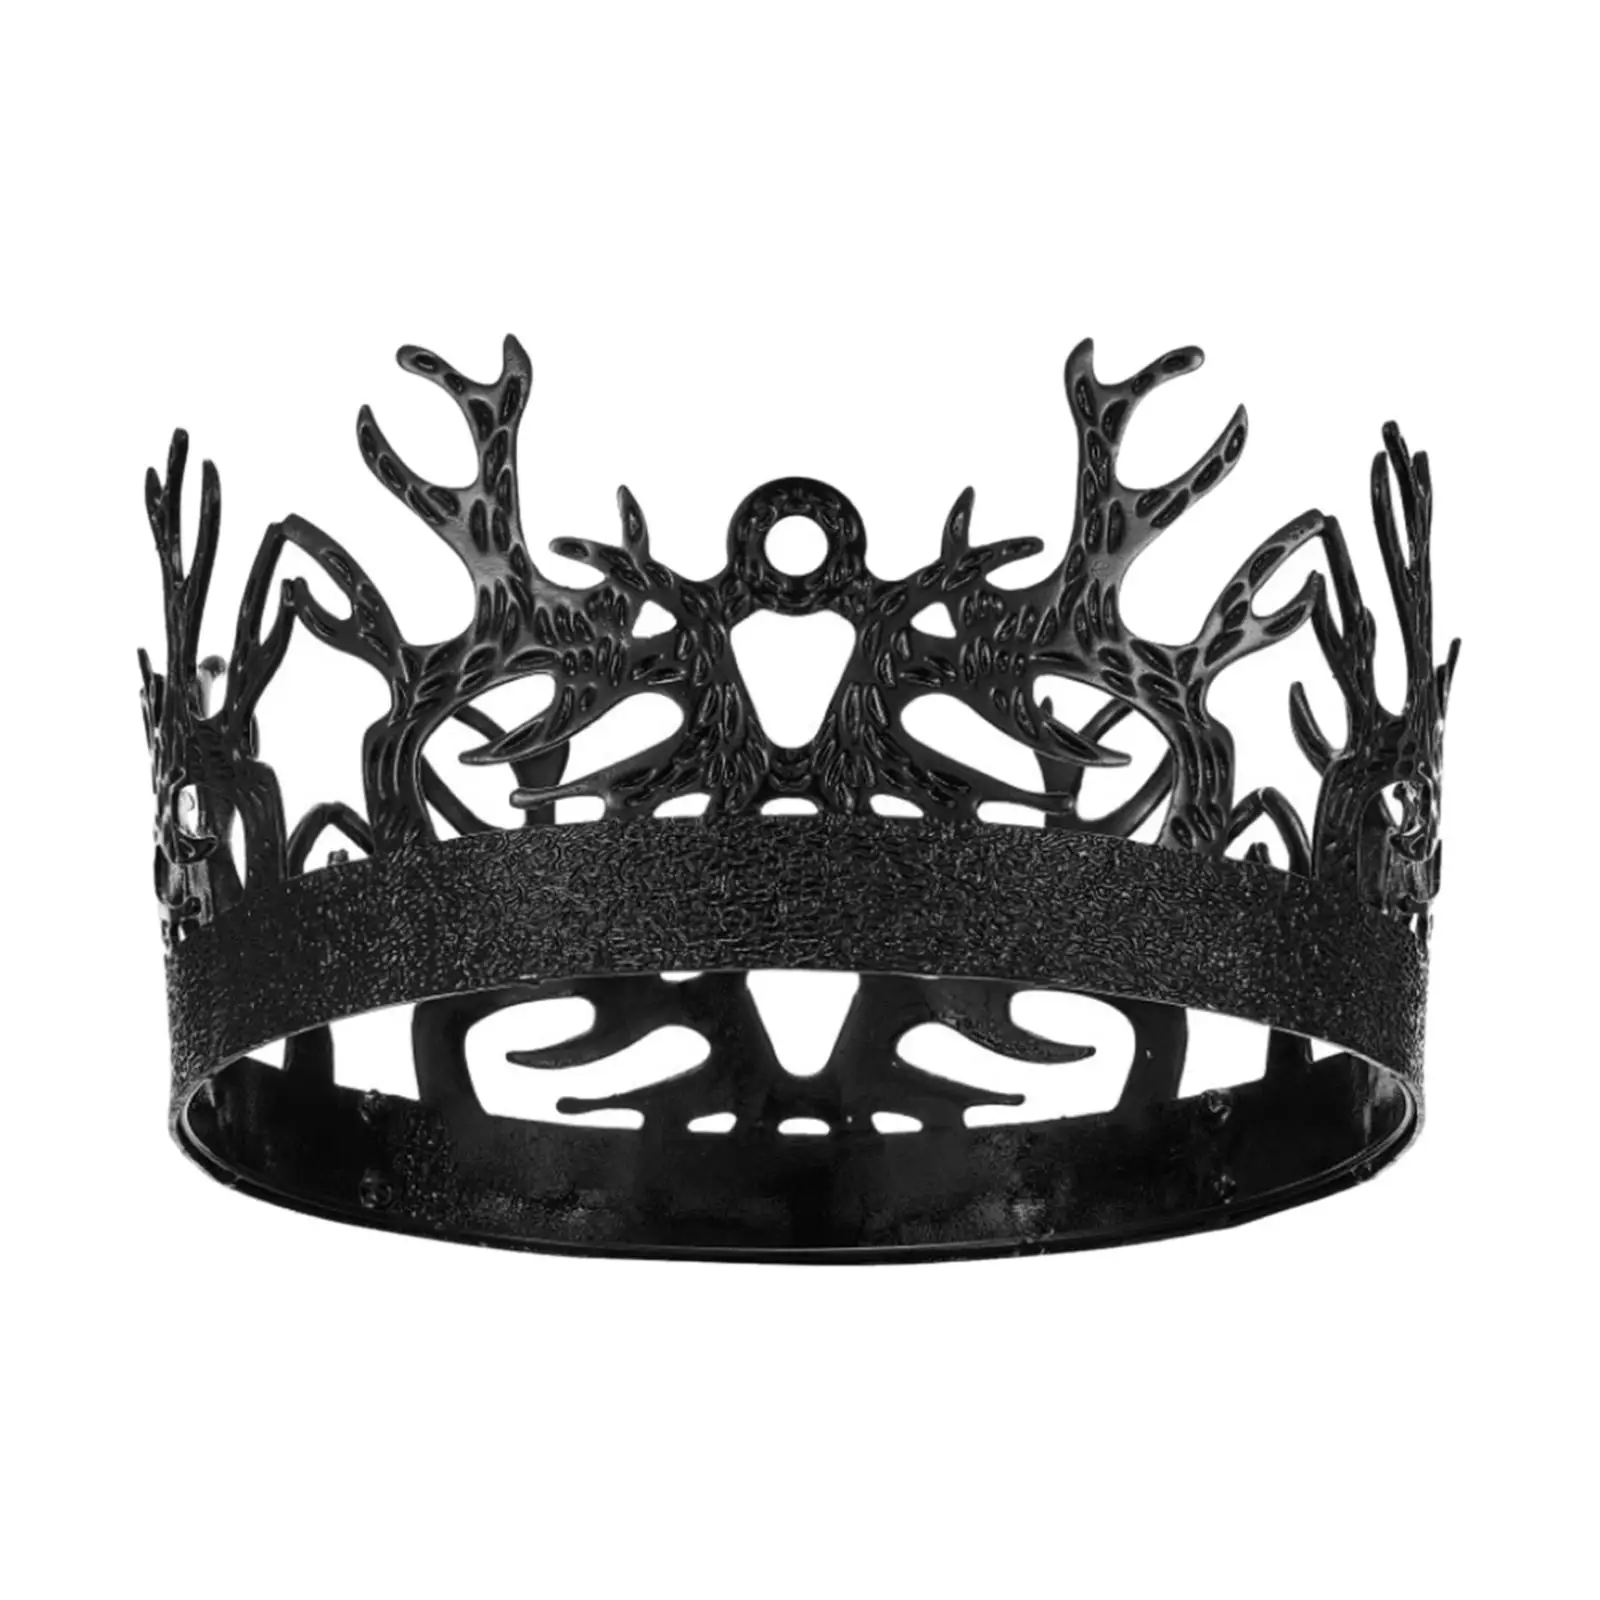 

Gothic Crown Headdress Vintage Gift Headgear Tiaras Headpieces Hairband Crown for Themed Parties Cosplay Weddings Festival Decor